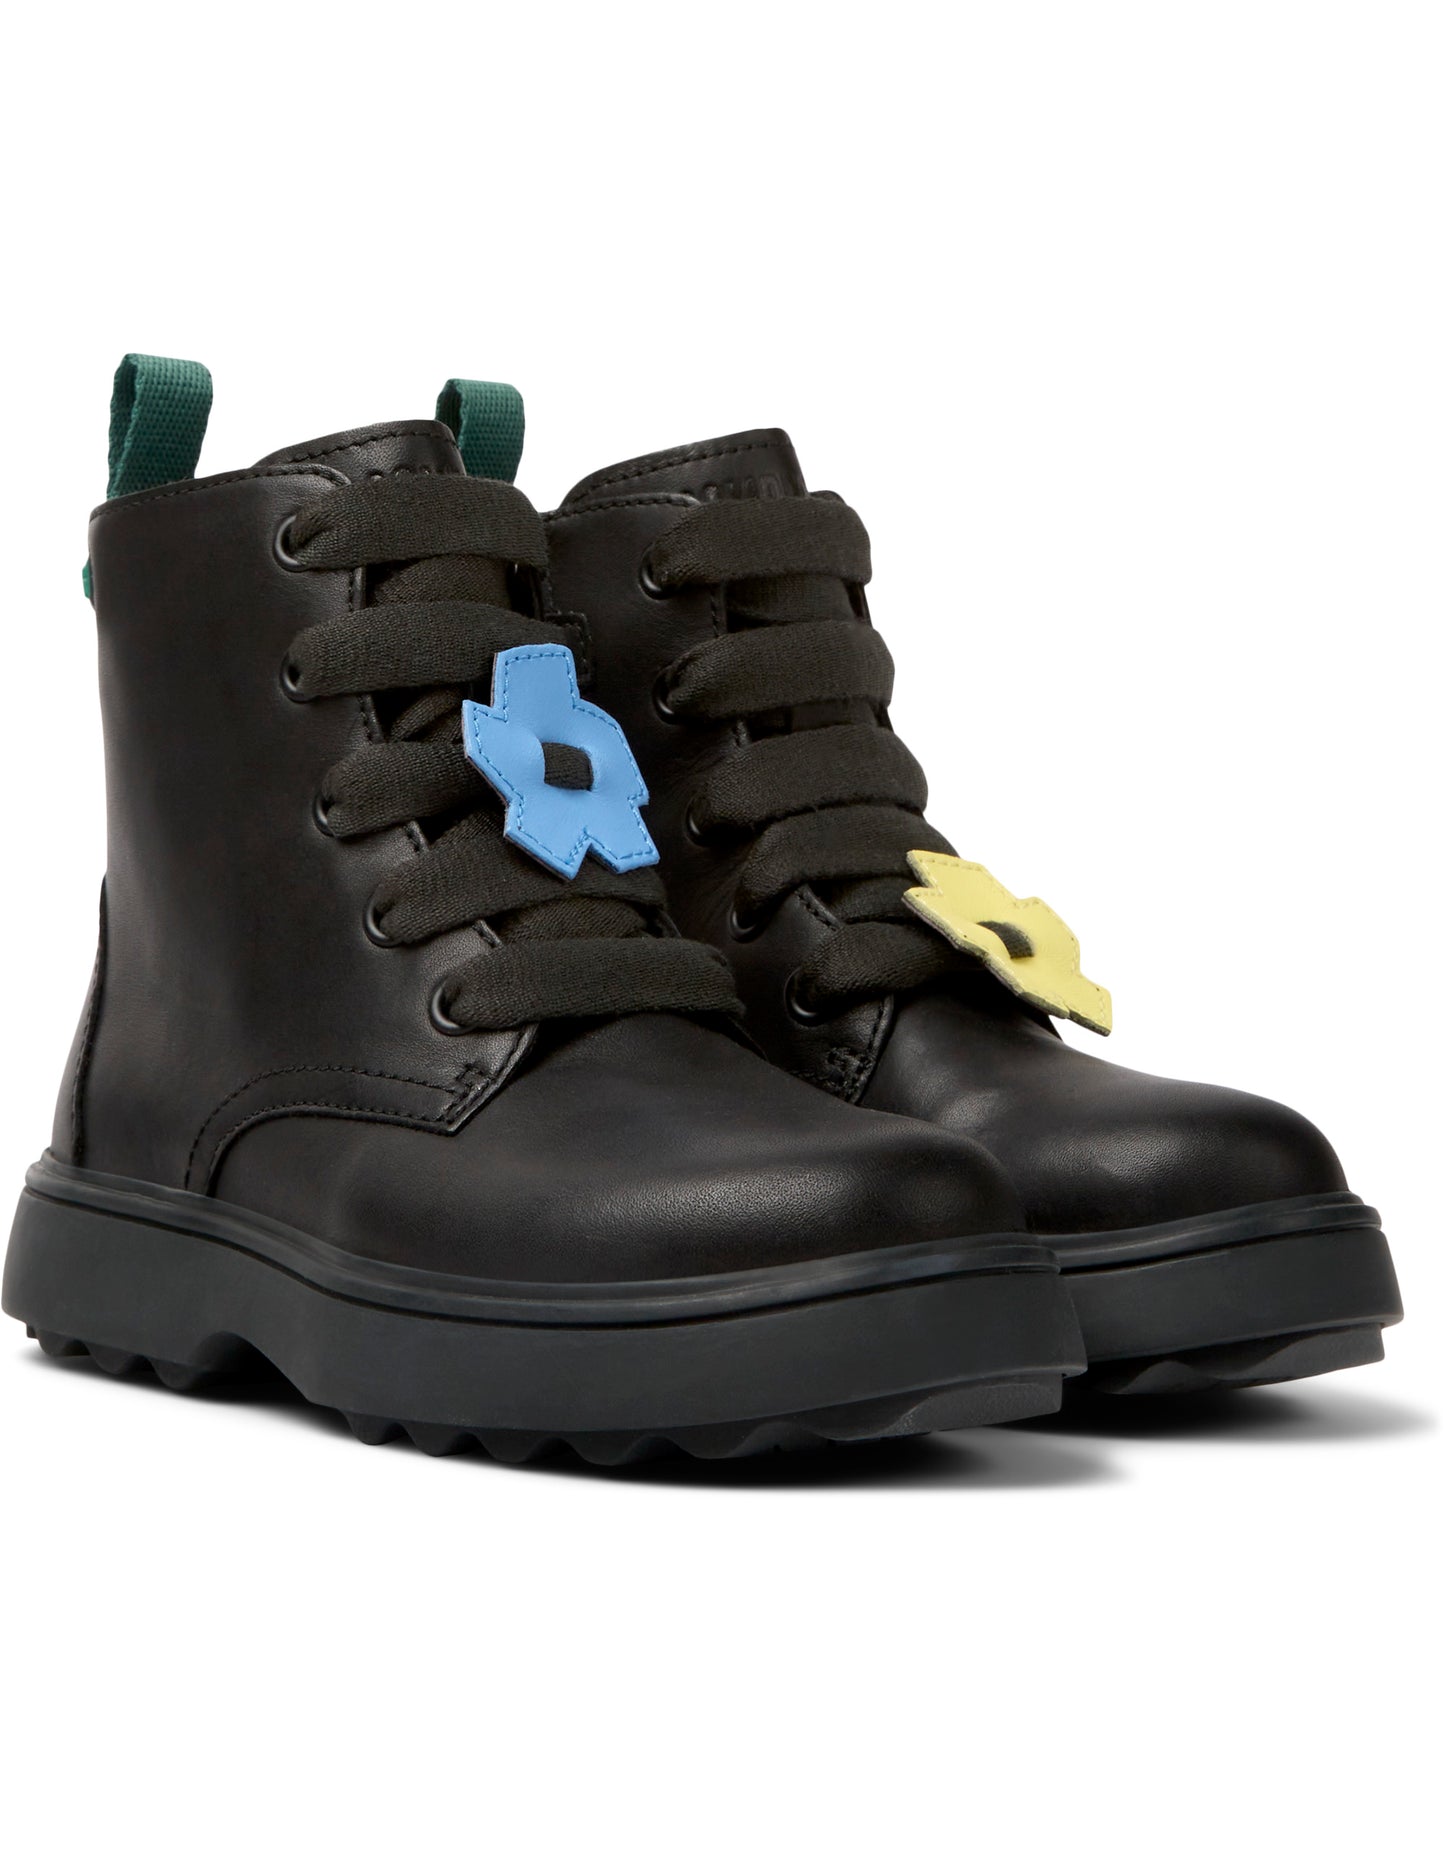 A girls chunky ankle boot by Camper, style K900150-012,in black leather with zip and lace fastening showing flowers on laces. Angled view.